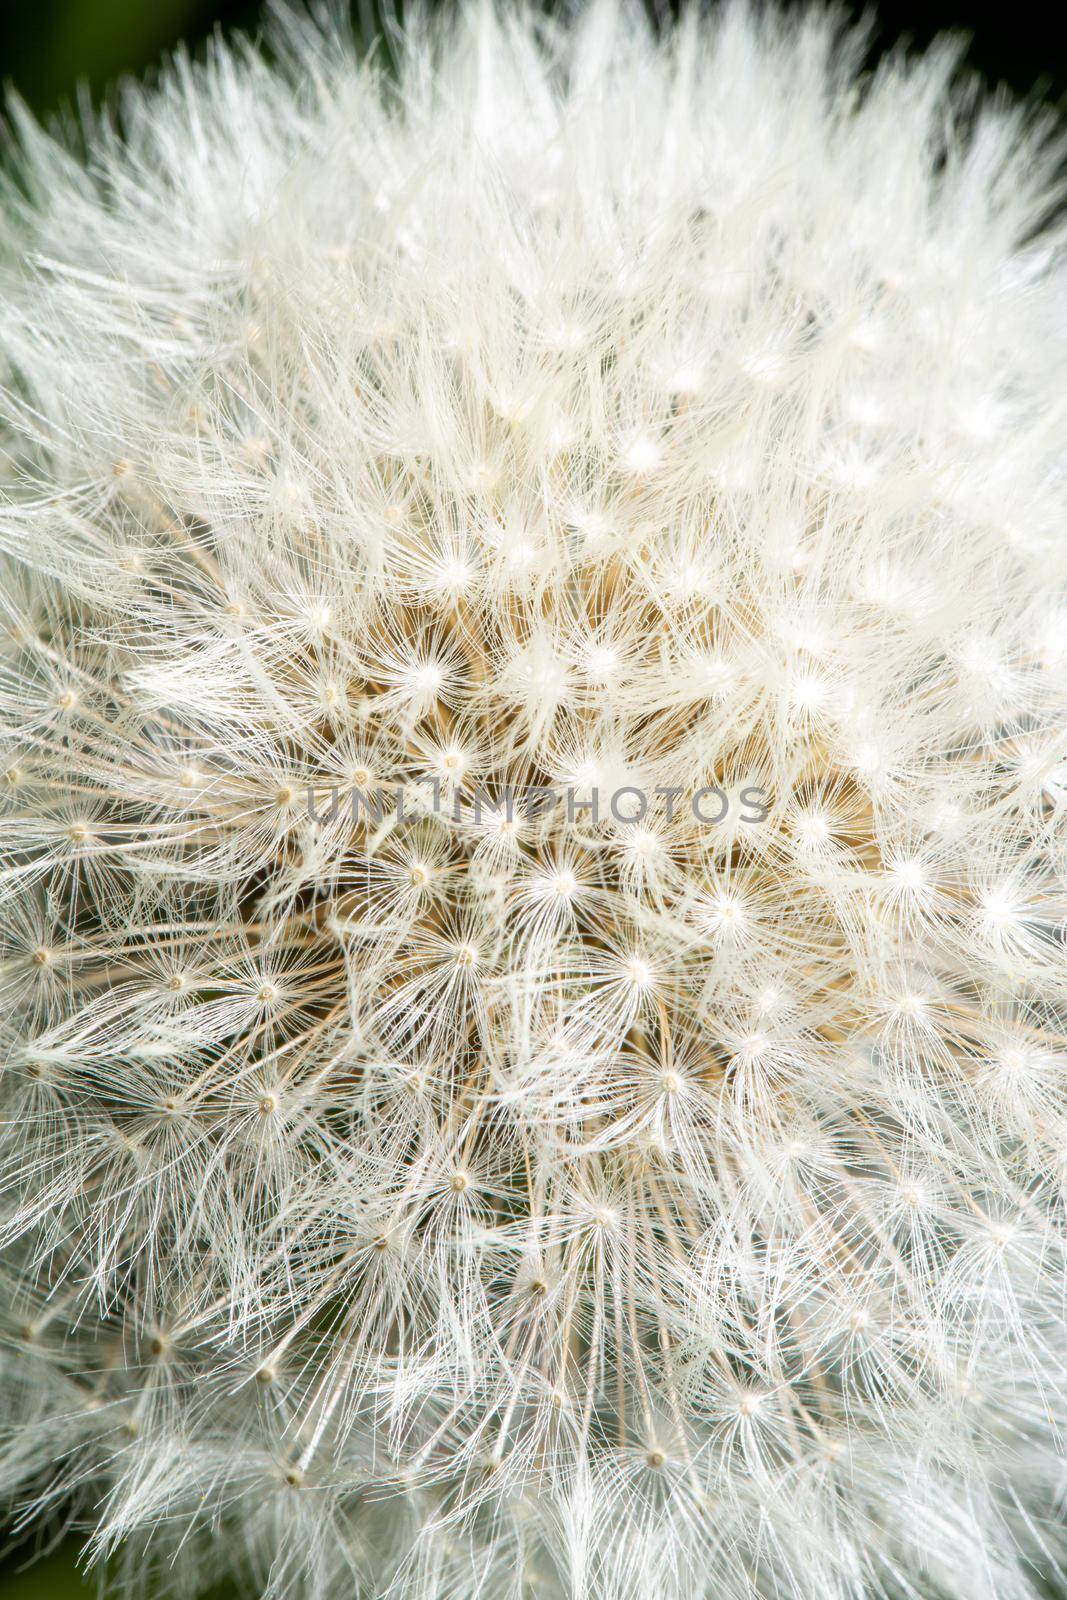 Fluffy white flower head of dandelion texture. Close-up view